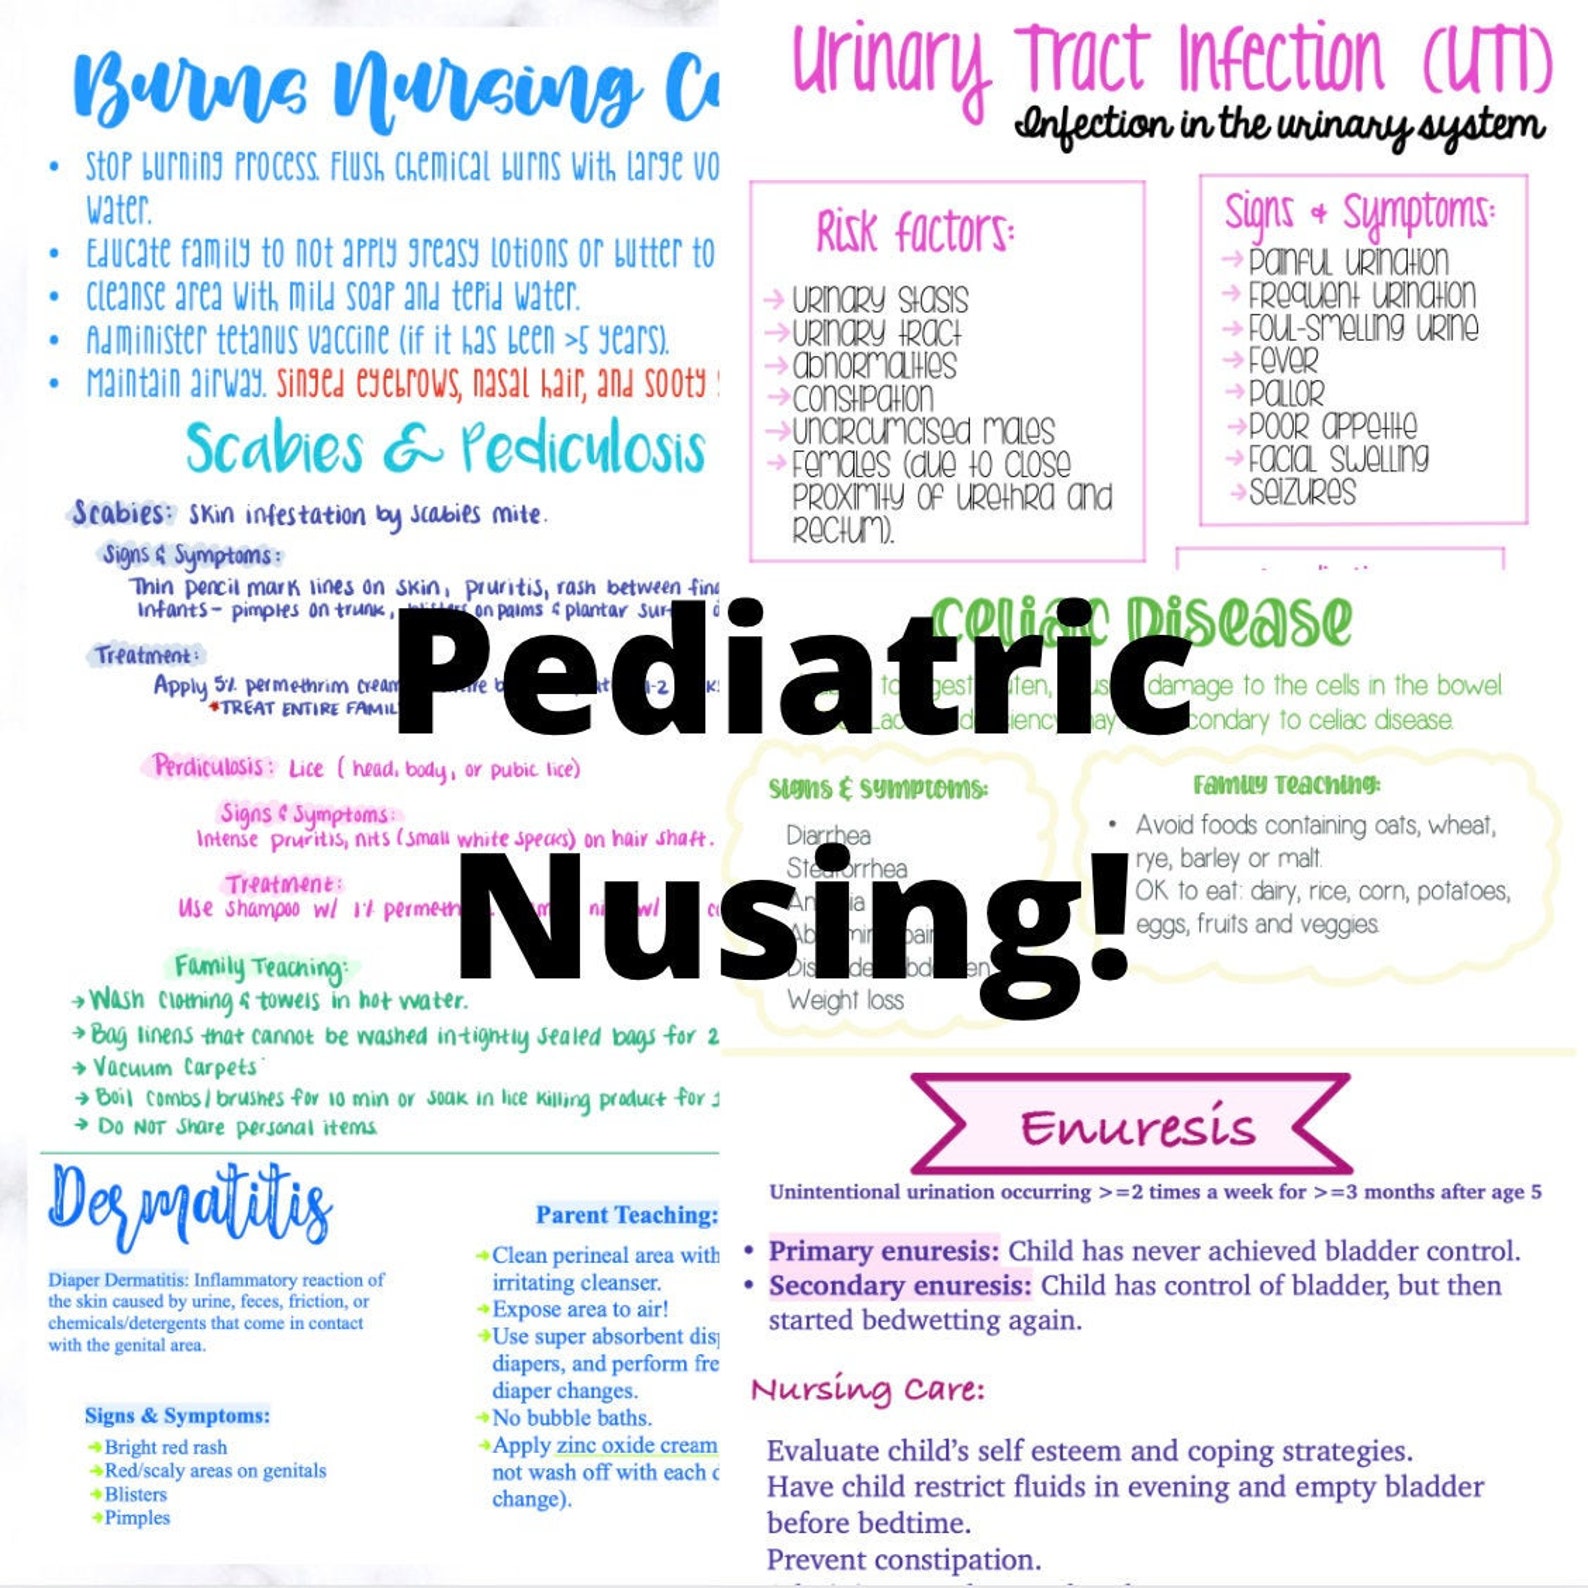 pediatric research papers